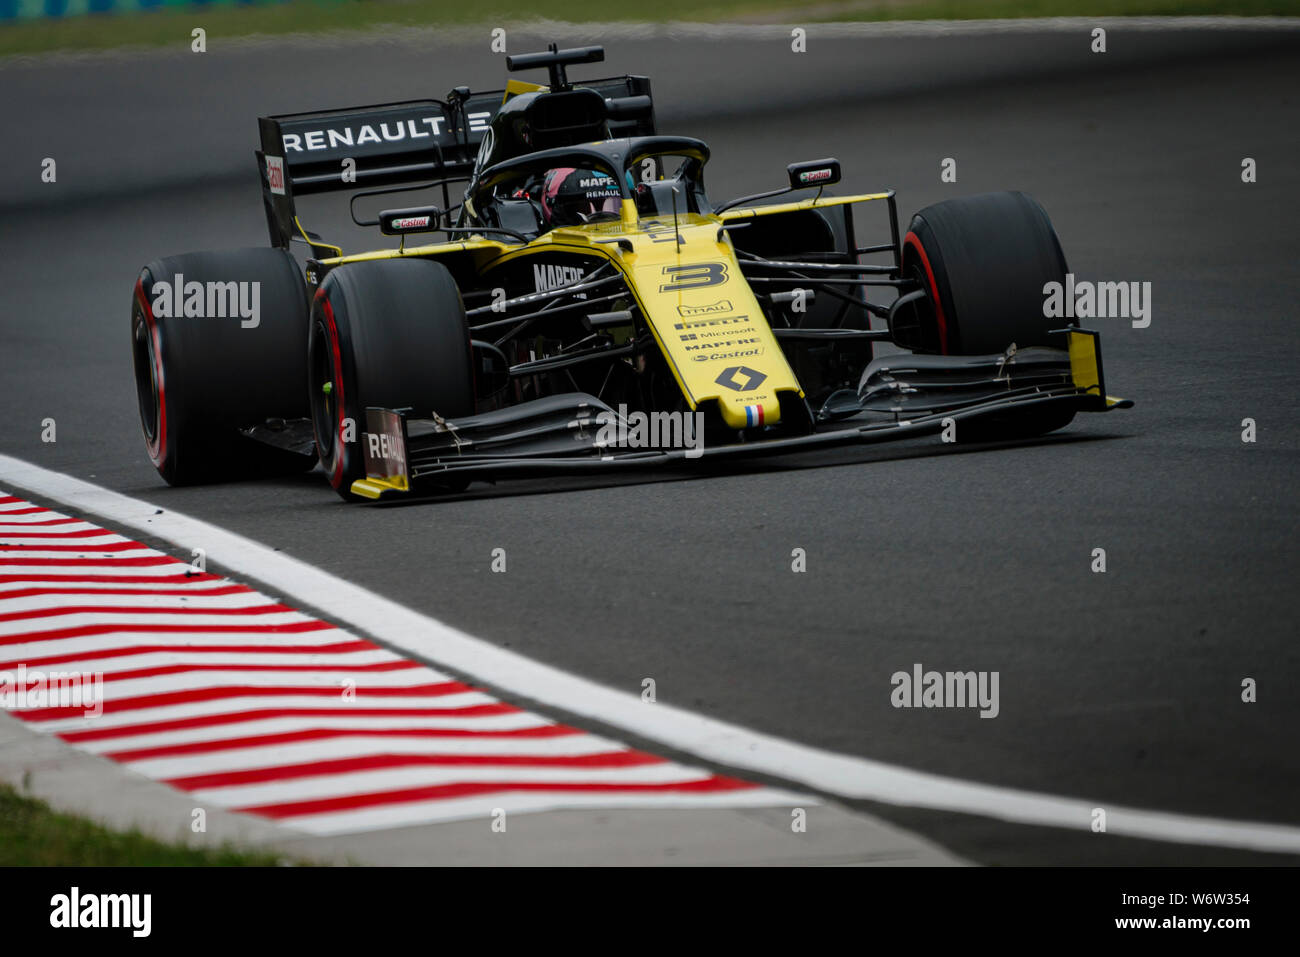 Renault Sport F1 Team’s Australian driver Daniel Ricciardo competes during the first practice session of the Hungarian F1 Grand Prix. Stock Photo